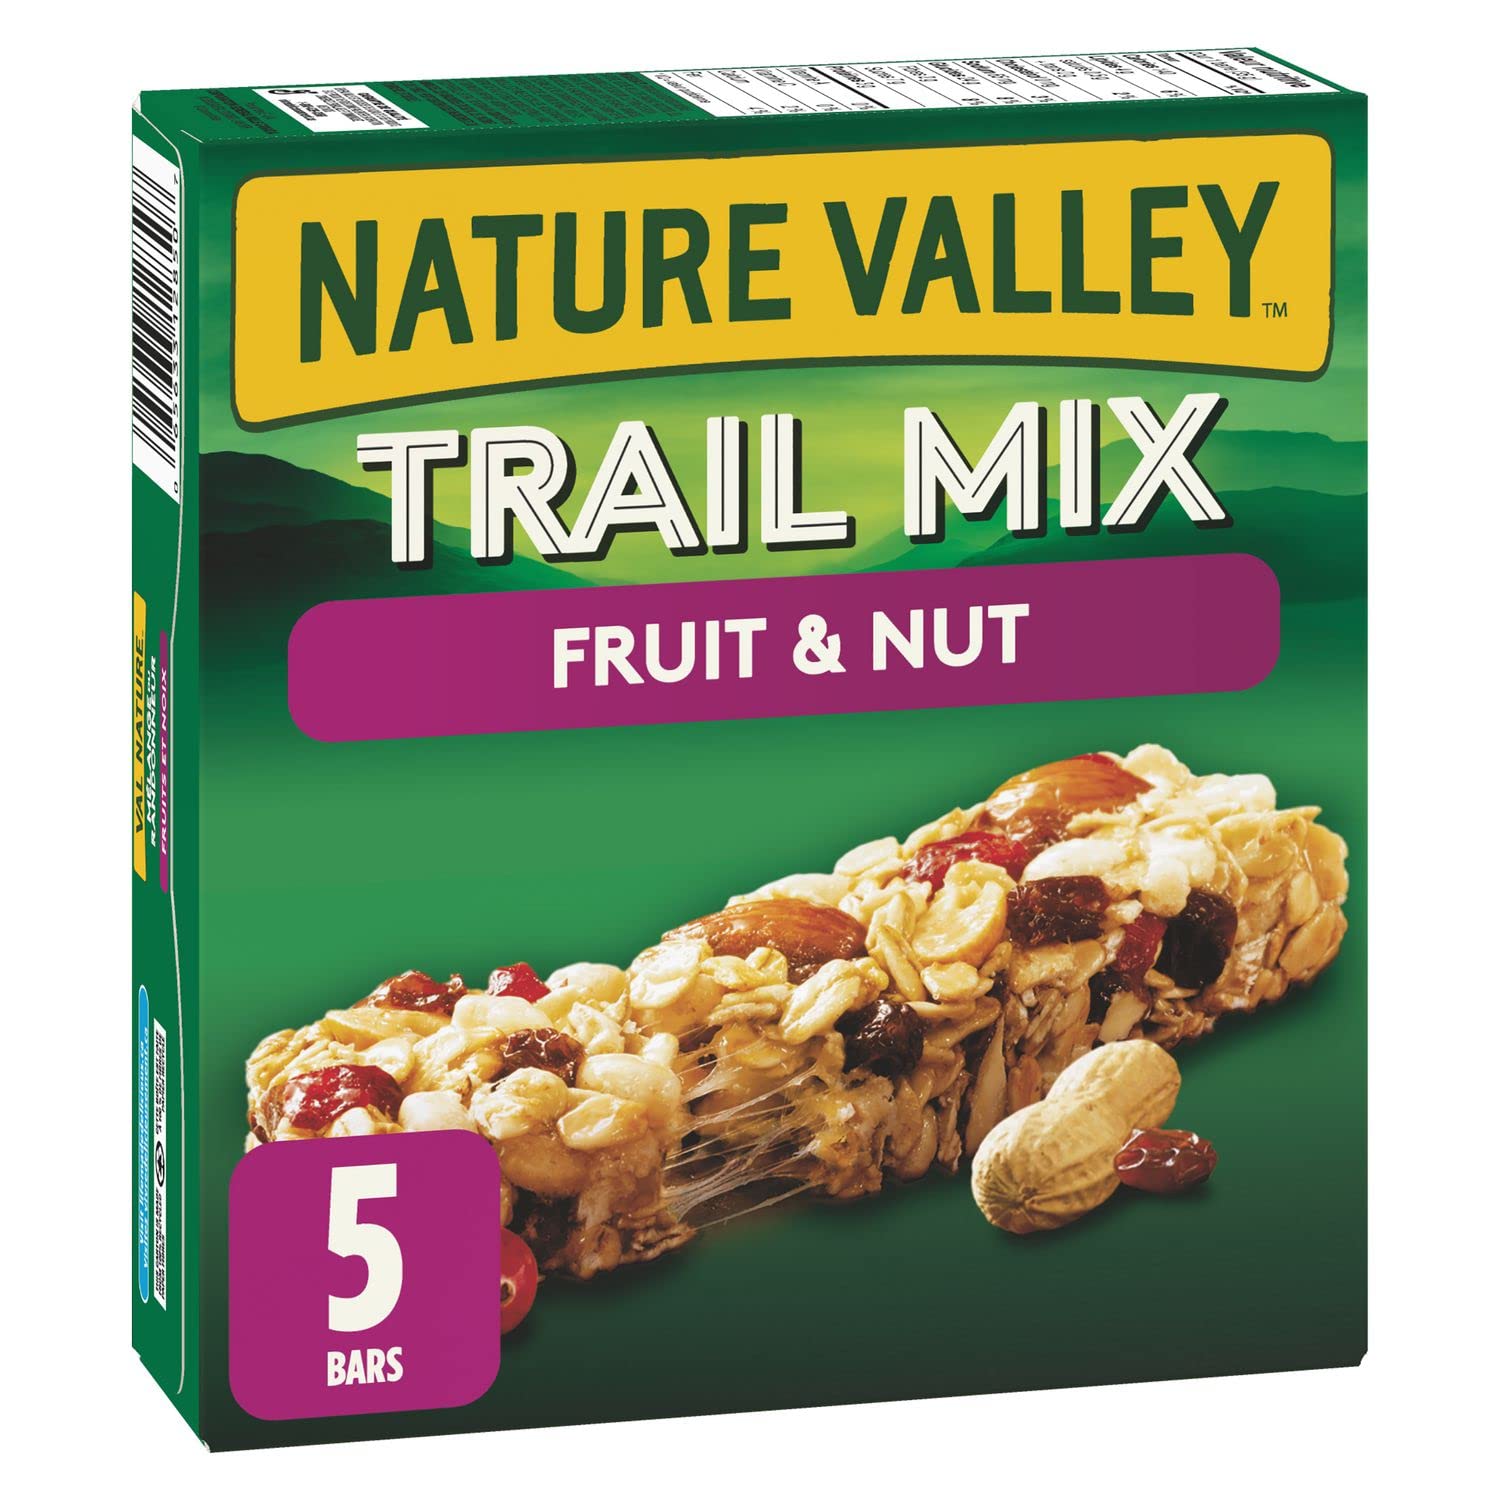 Nature Valley Trail Mix Fruit and Nut front cover